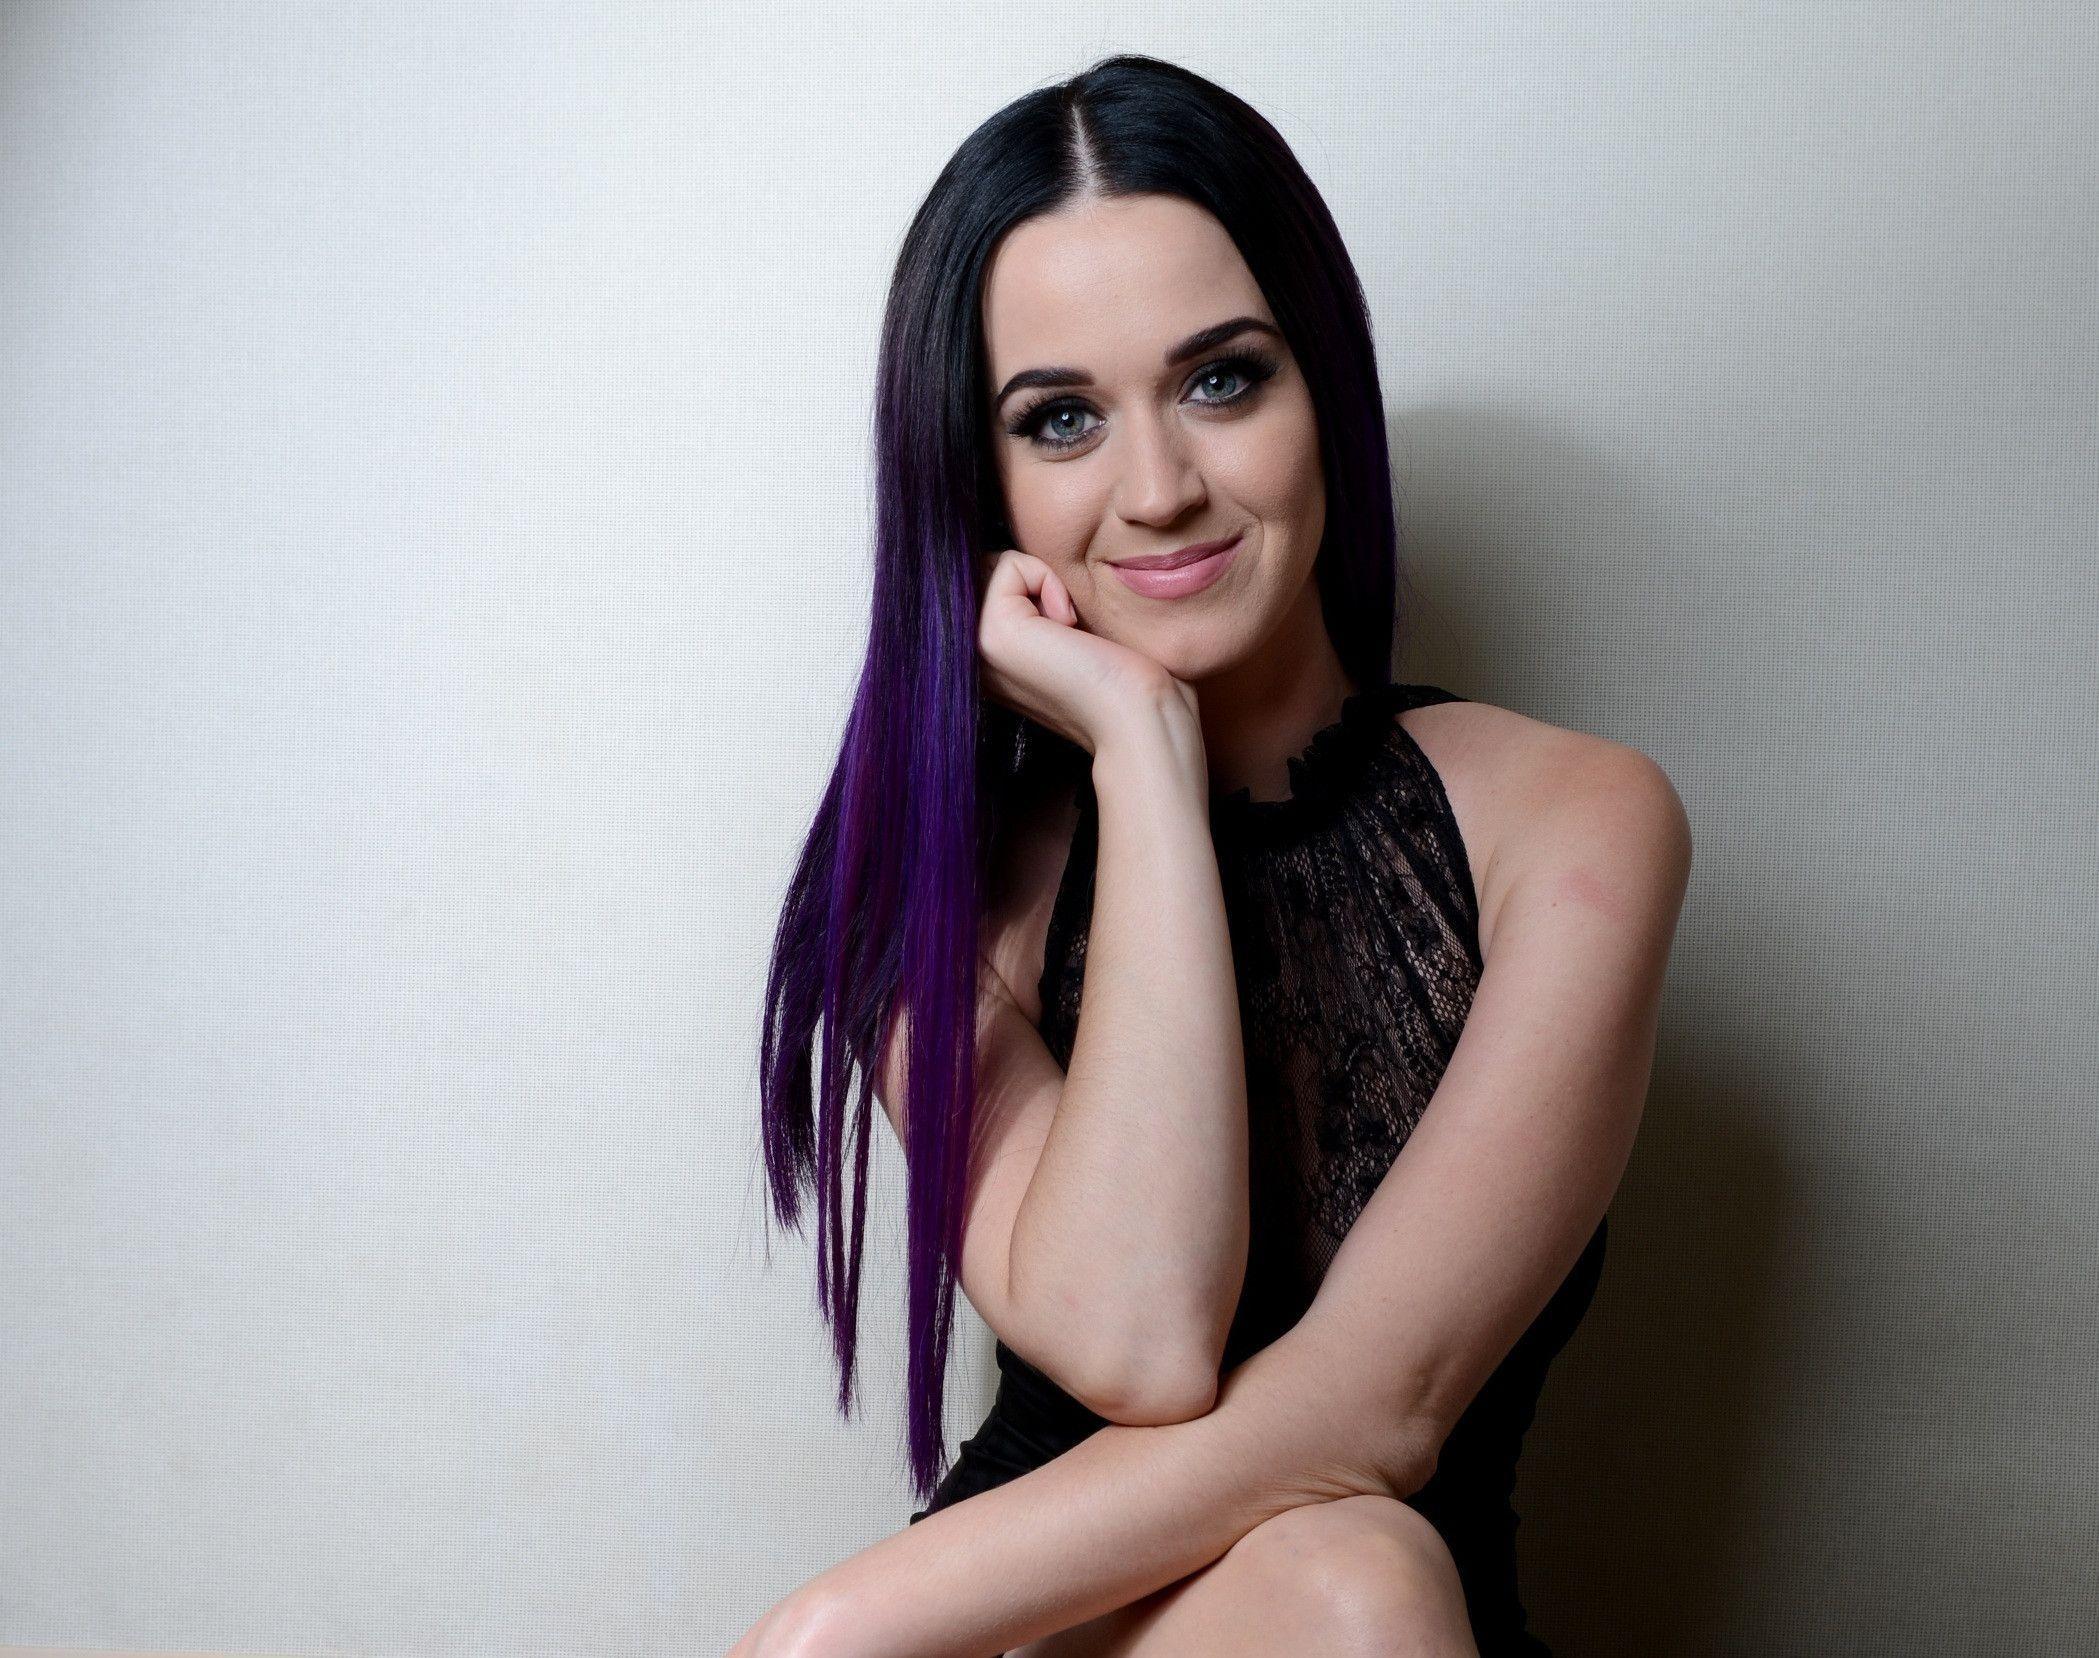 Beautiful Smile Katy Perry Wallpaper Katy Perry Wallpaper HD Free